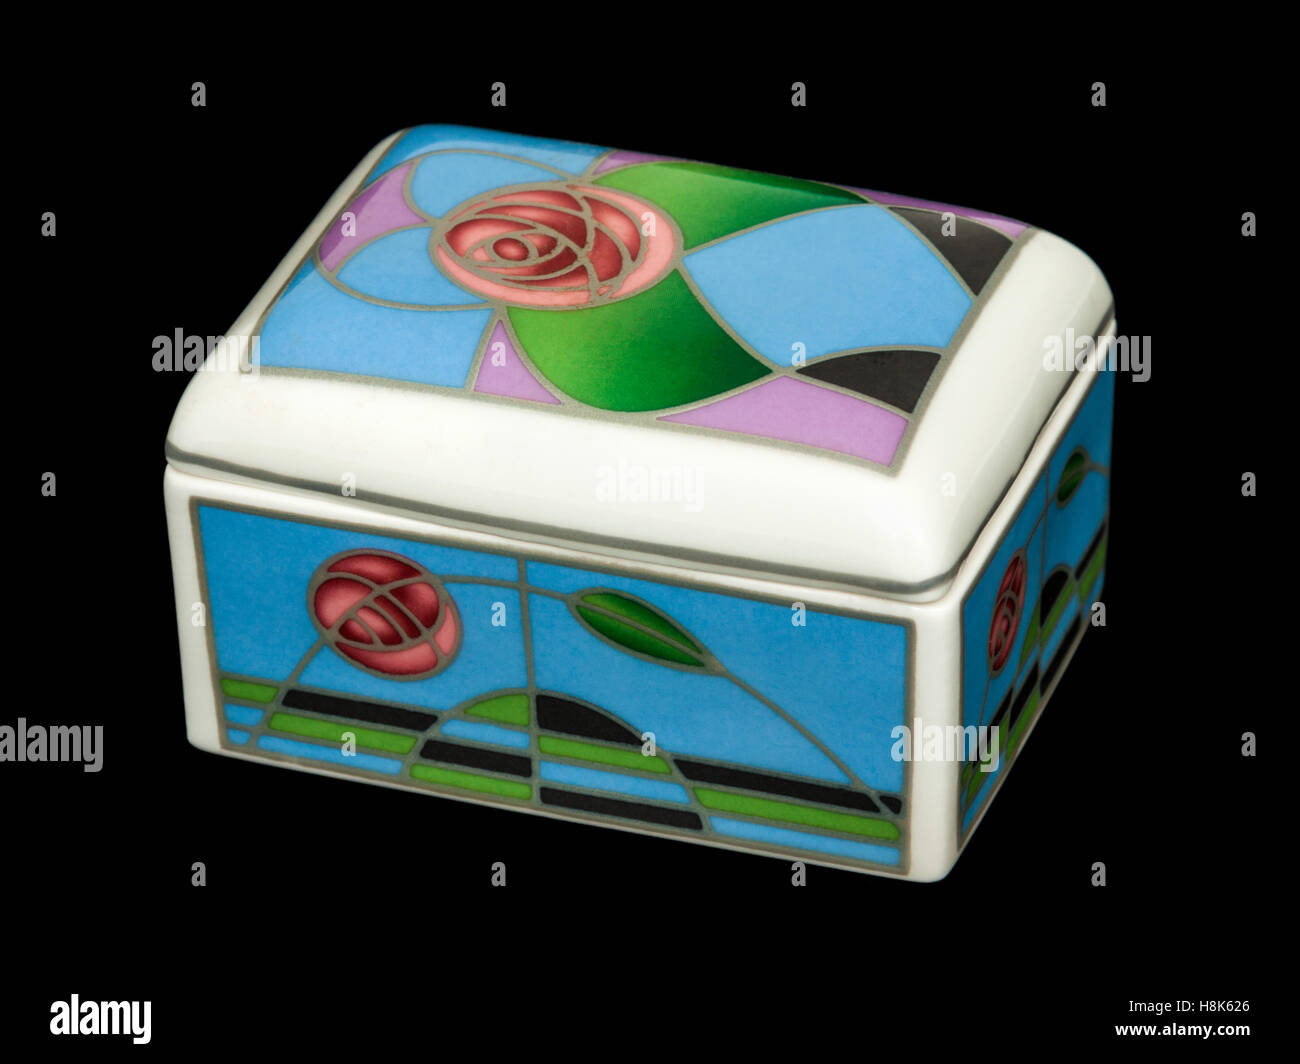 Porcelain trinket box by Past Times featuring a design by Charles Rennie Mackintosh, the famous Scottish art nouveau artist Stock Photo